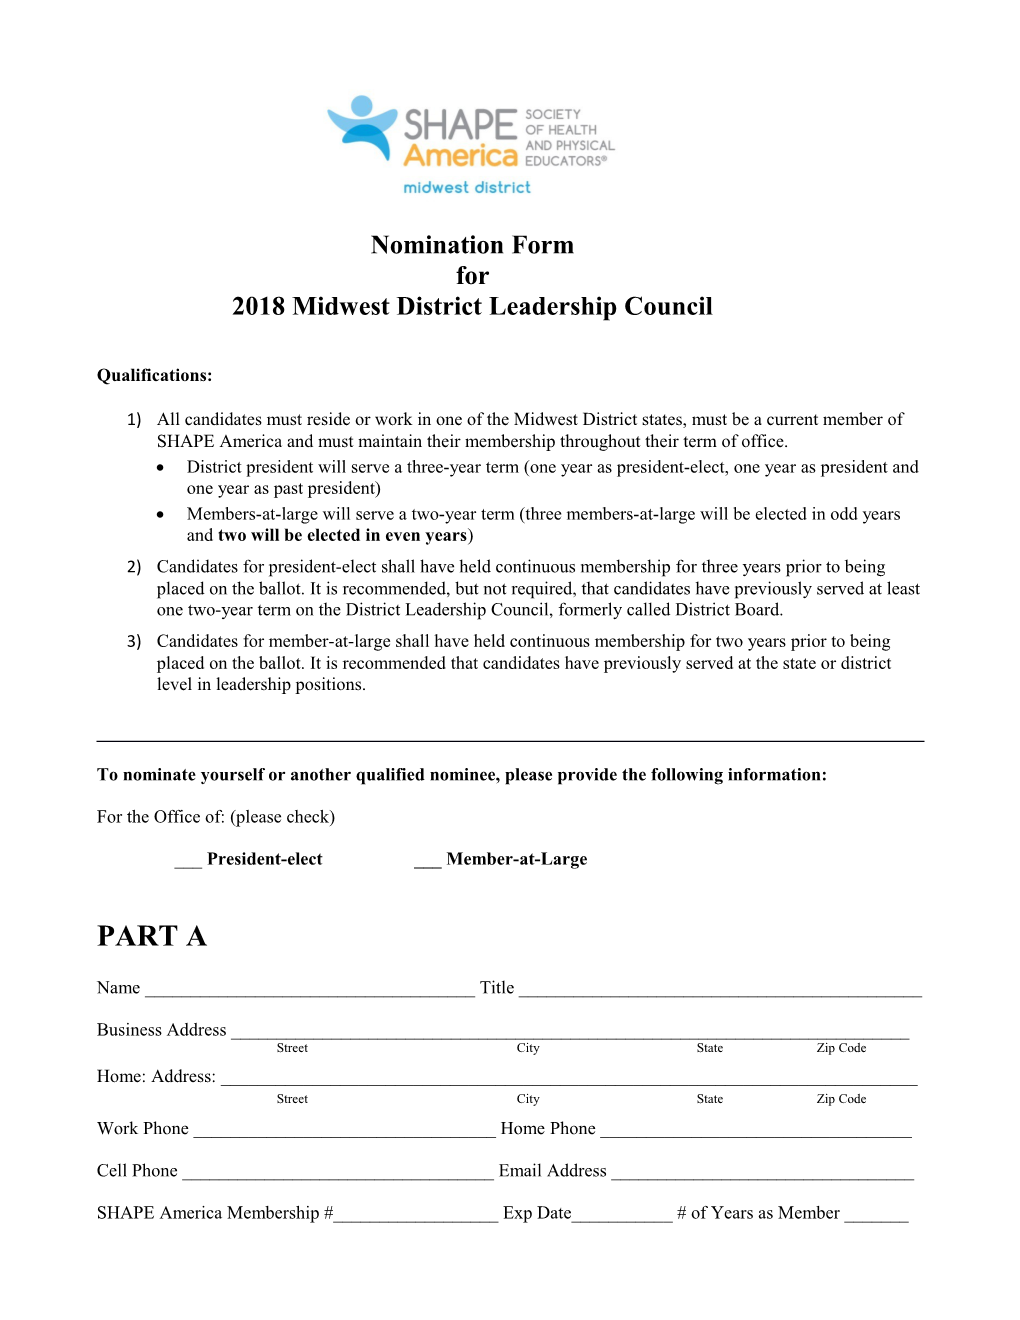 Nomination Form for 2018Midwest District Leadership Council